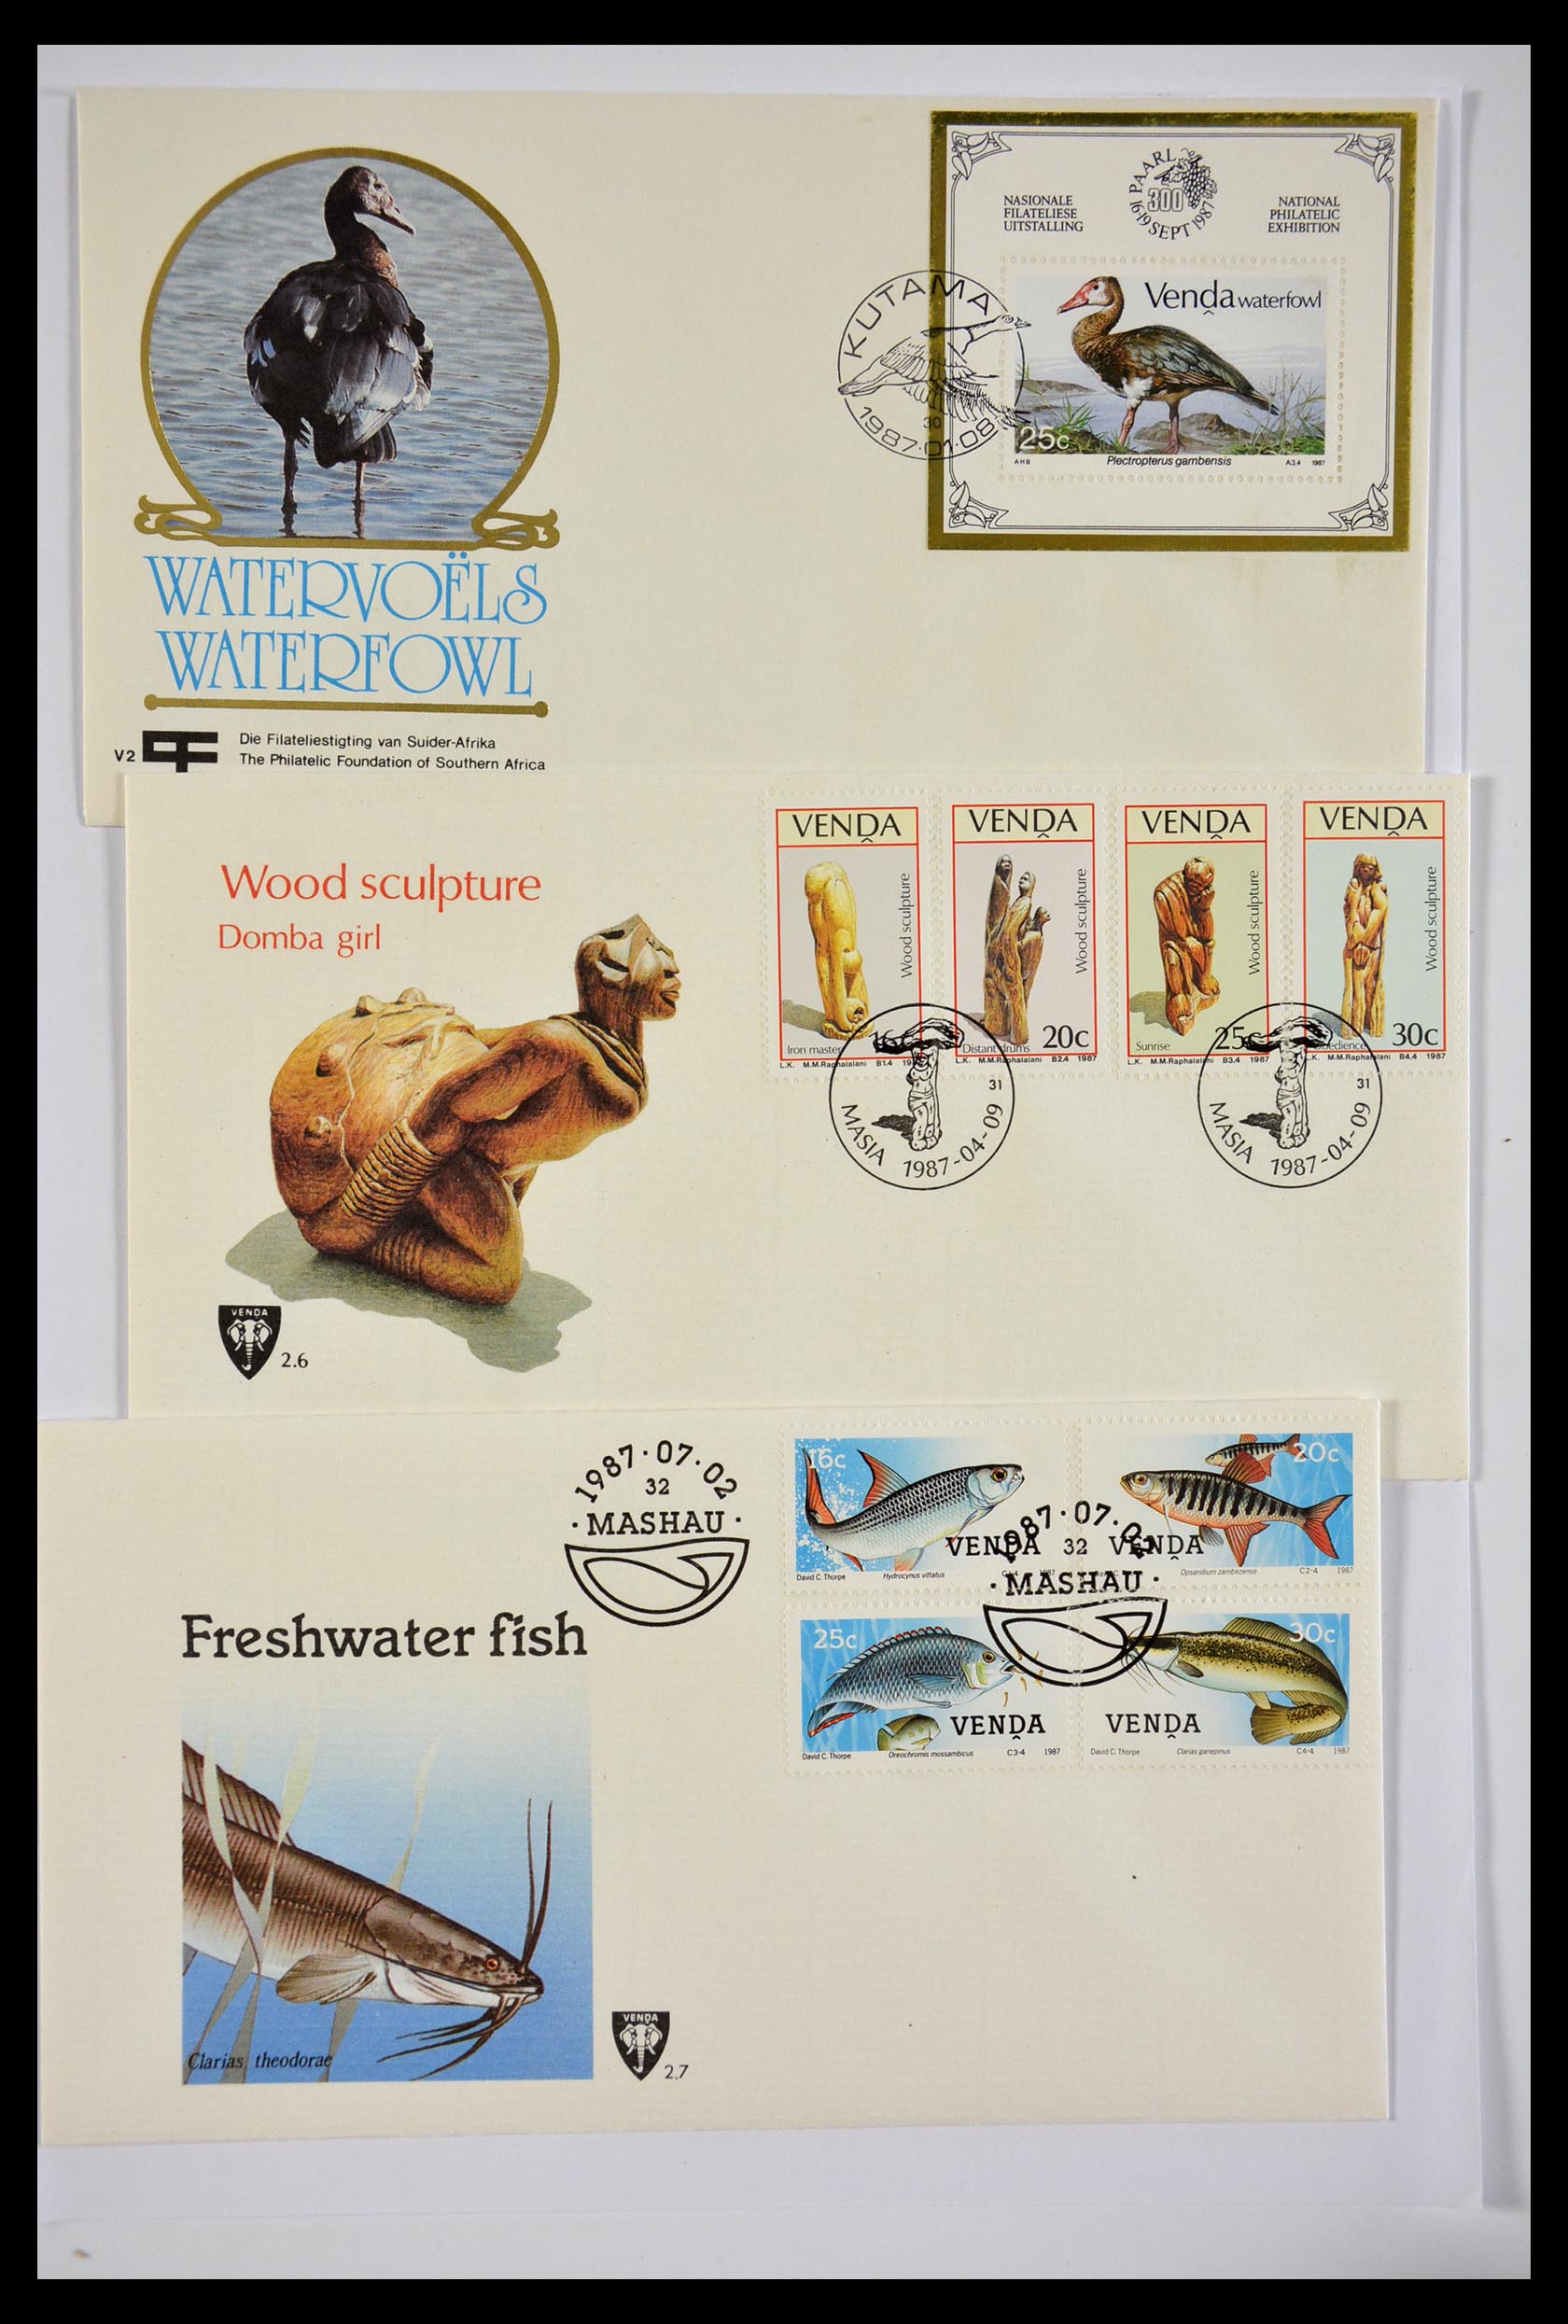 29356 573 - 29356 South Africa homelands first day covers 1979-1991.